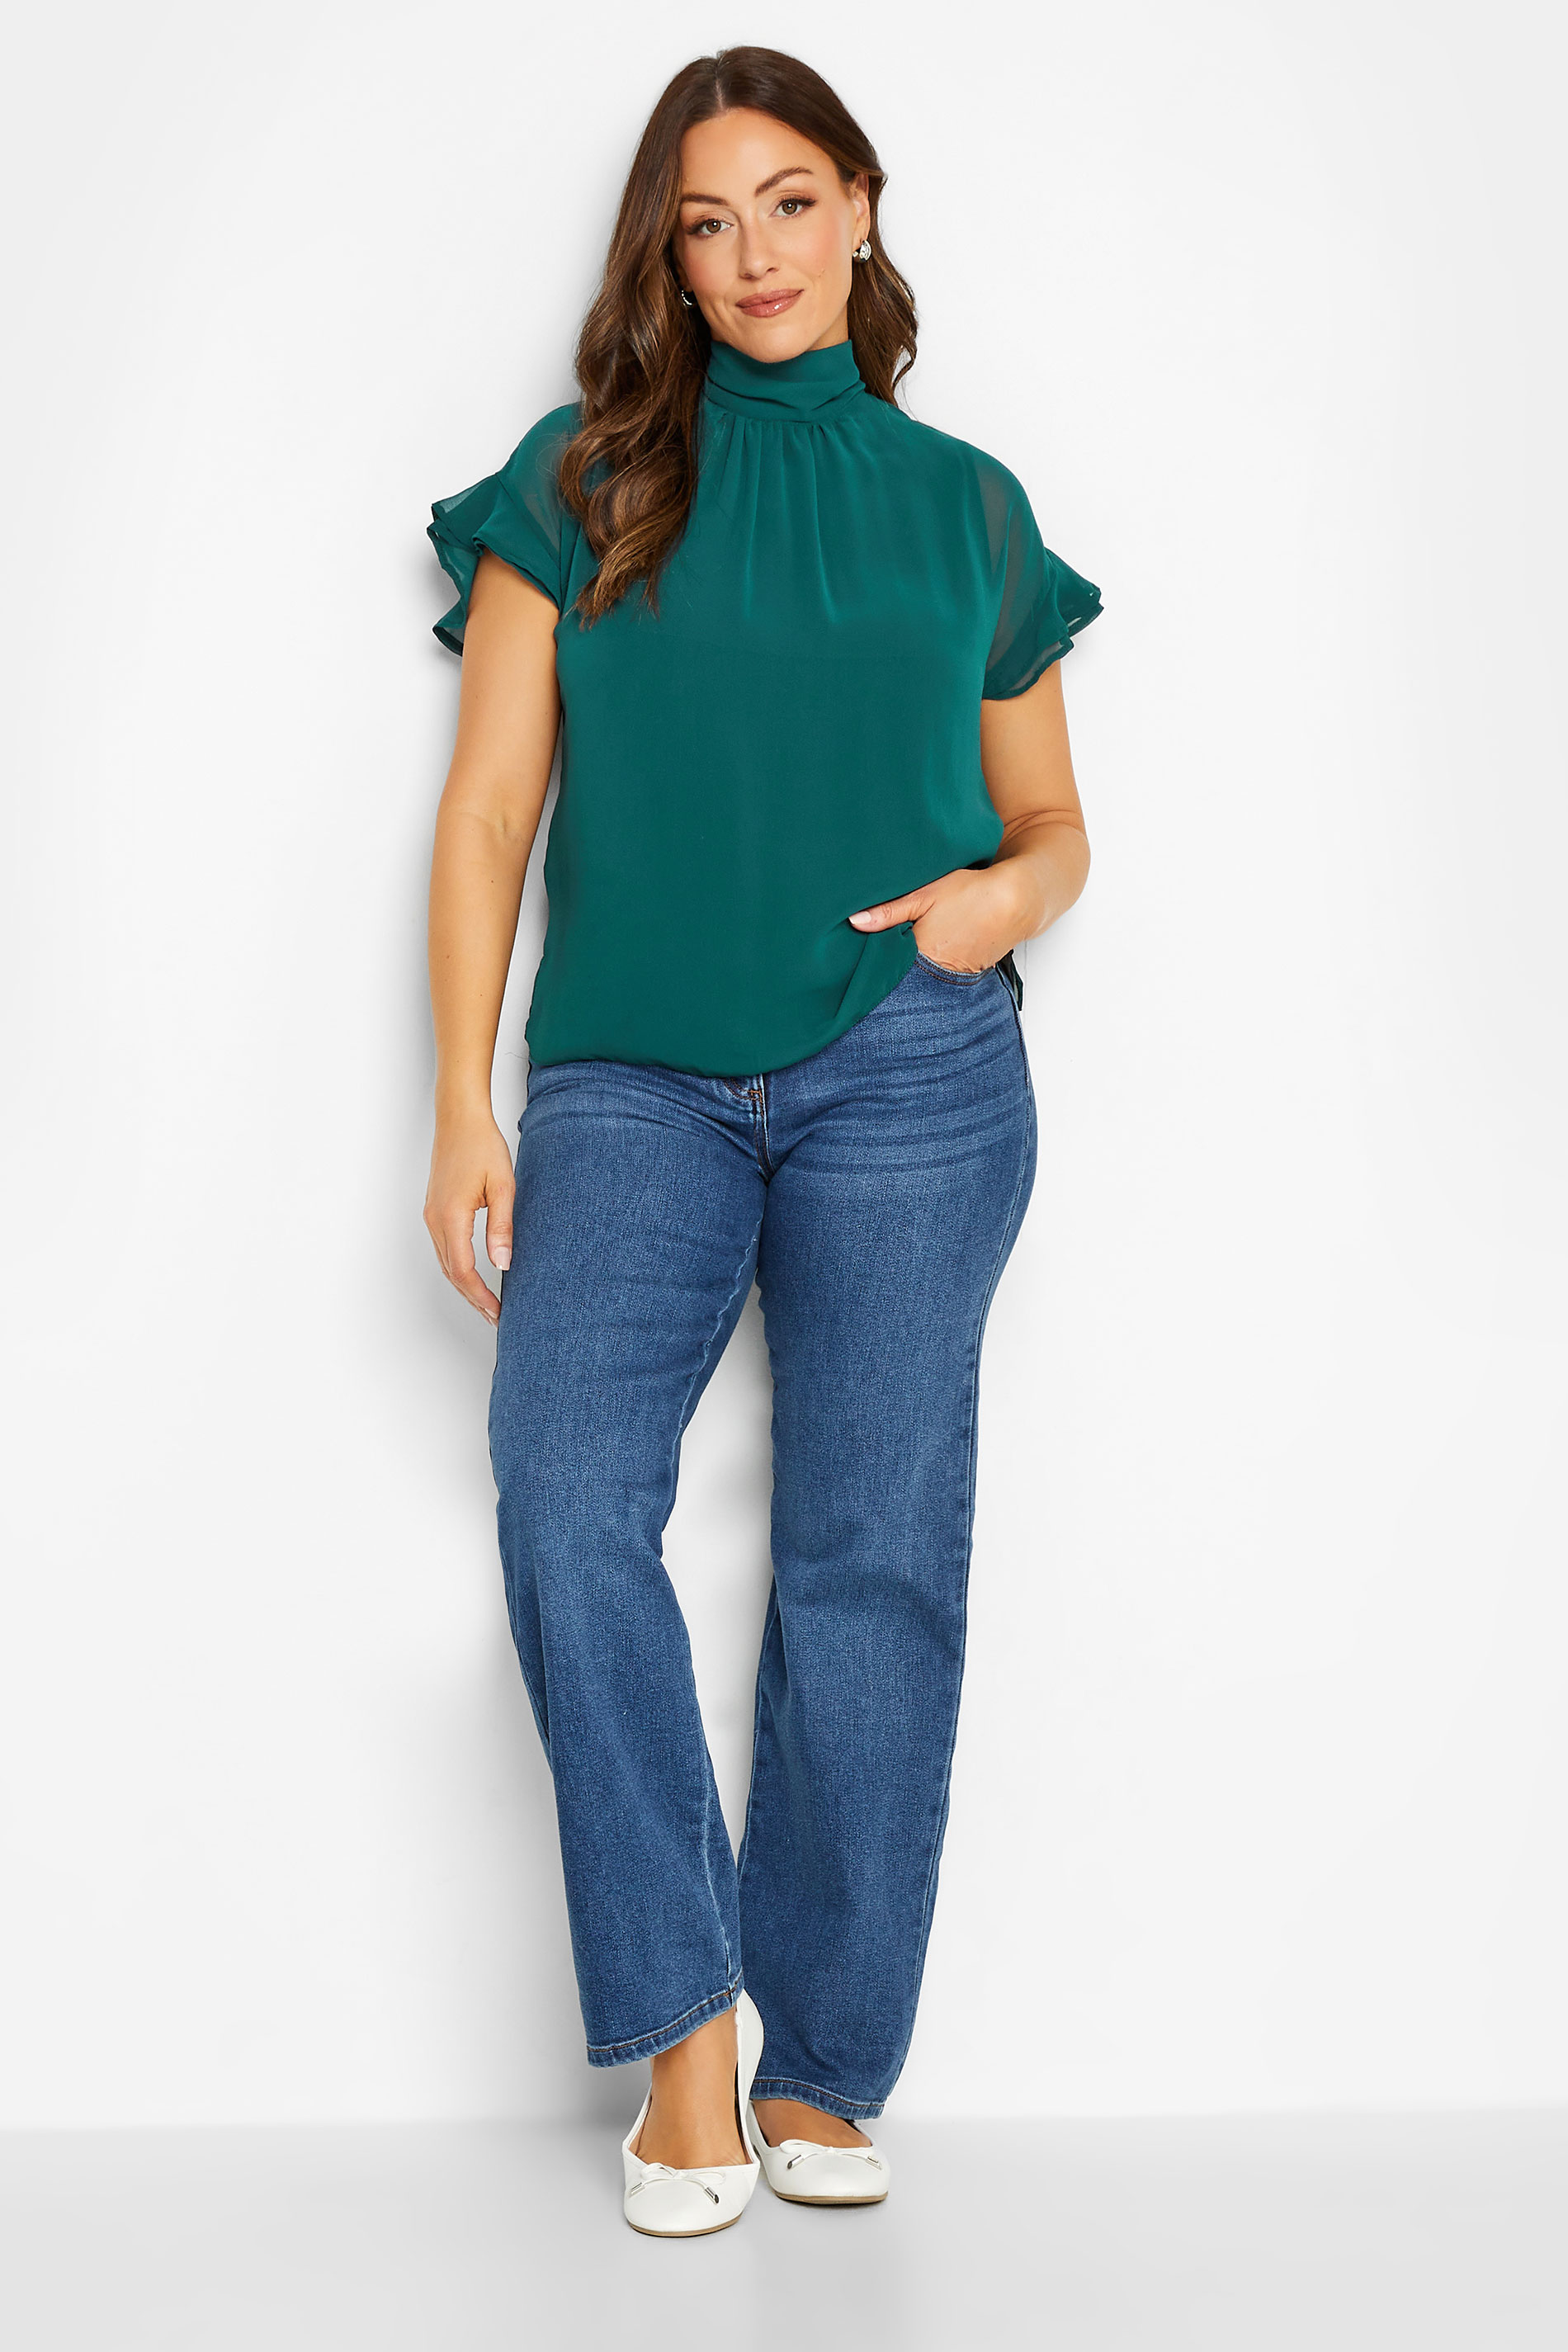 M&Co Green High Neck Frill Sleeve Blouse